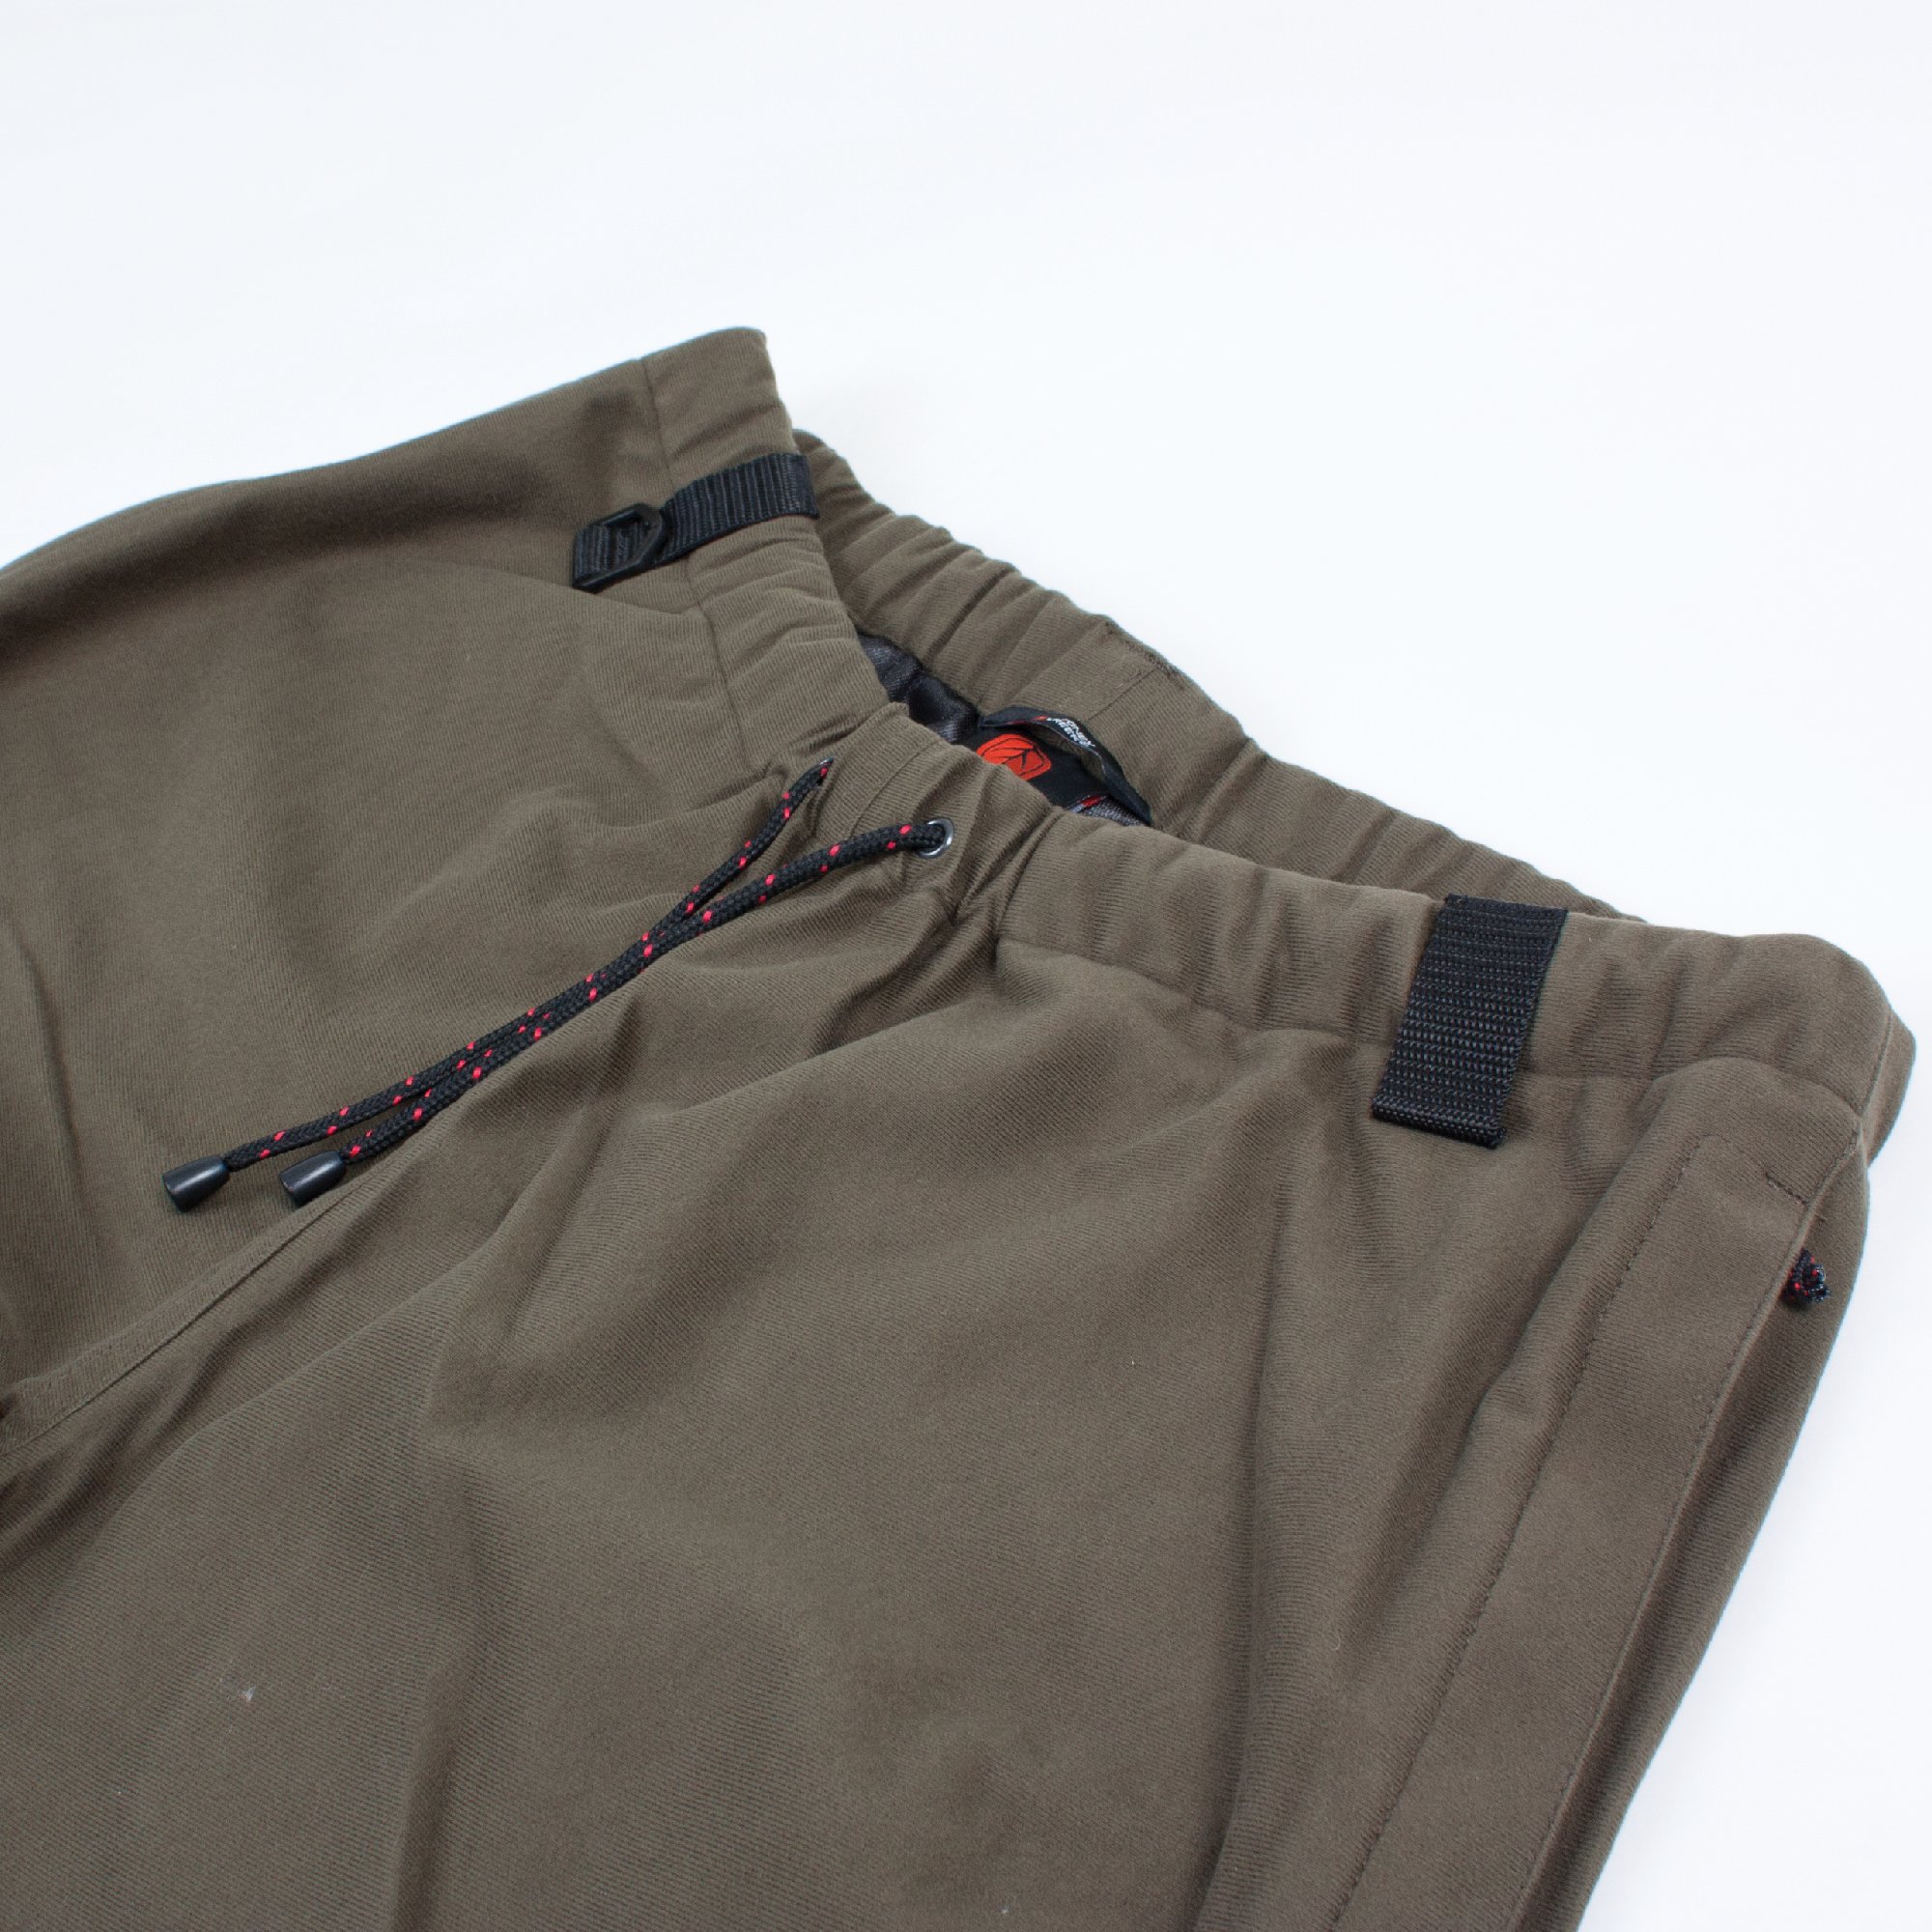 Suppressor Overtrousers